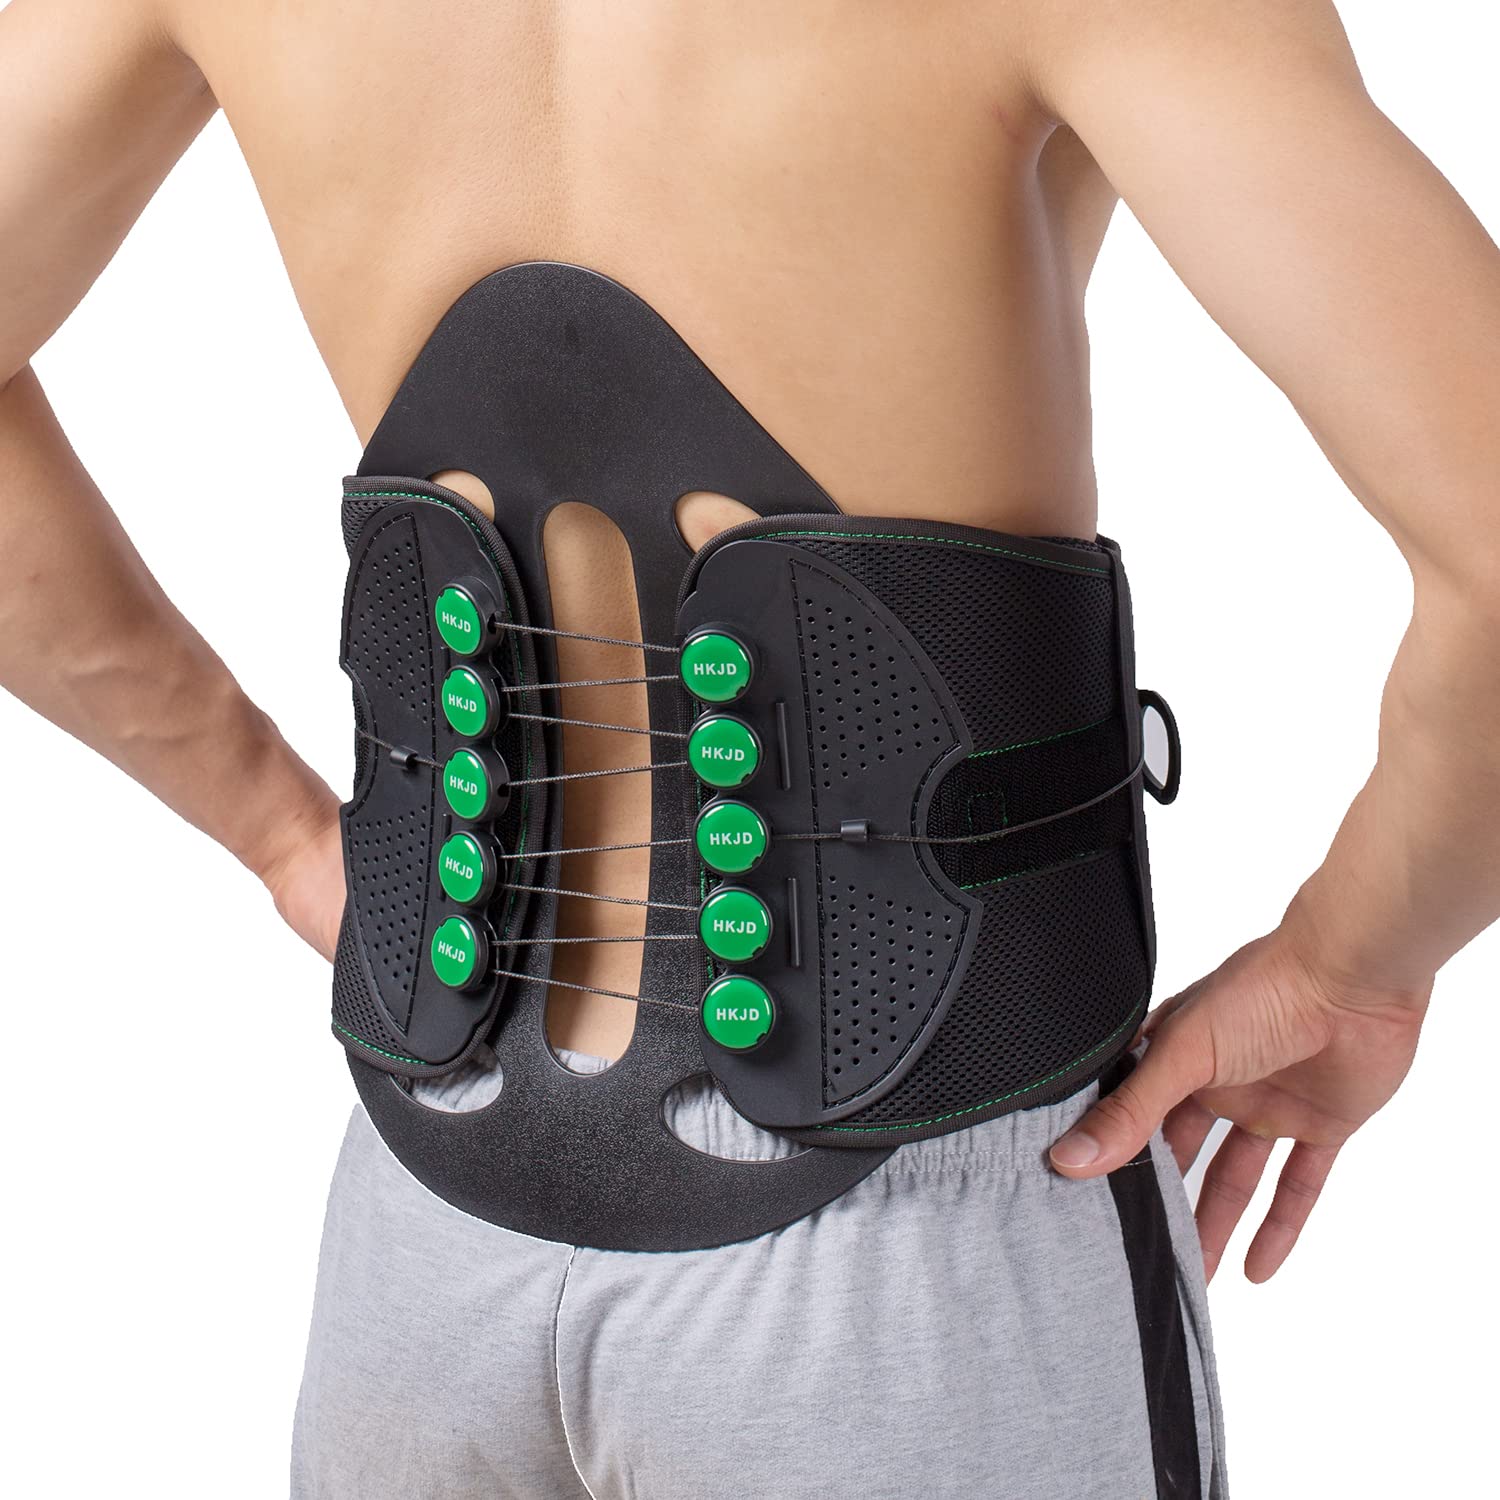 TIKE TLSO Inflatable Thoracolumbar Fixed Spinal Adjustable Back